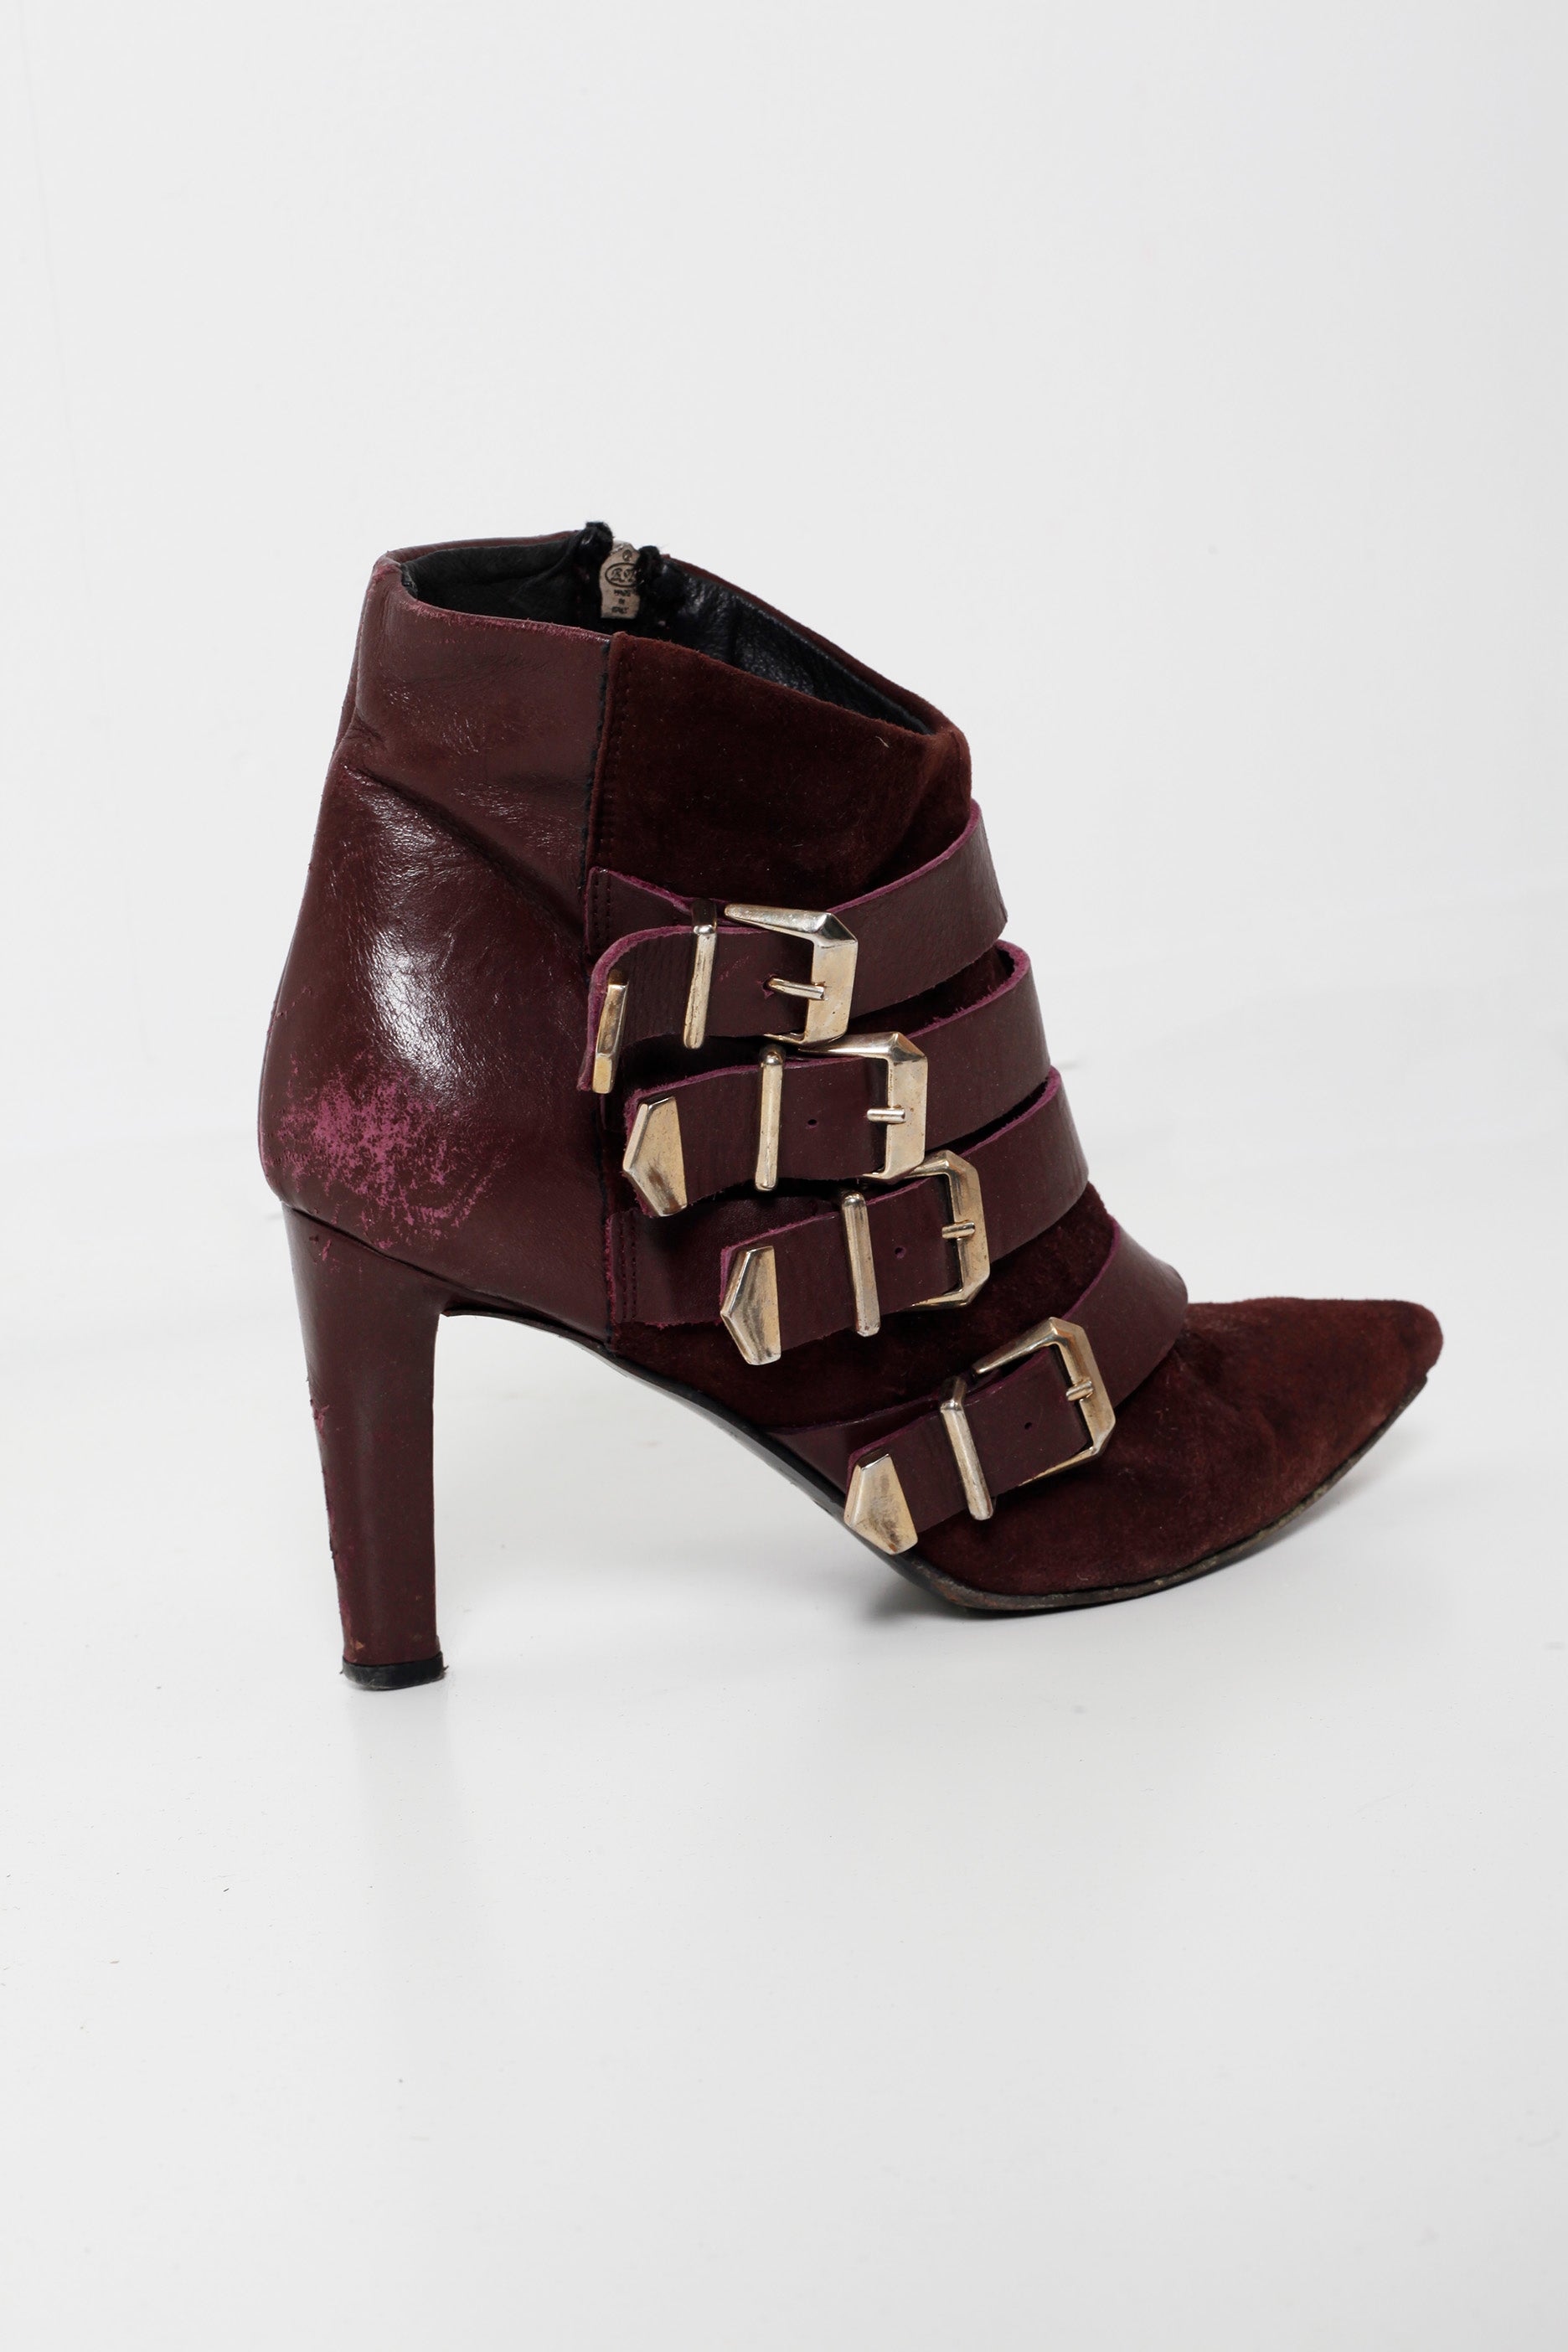 The Kooples Maroon Suede Ankle Boots